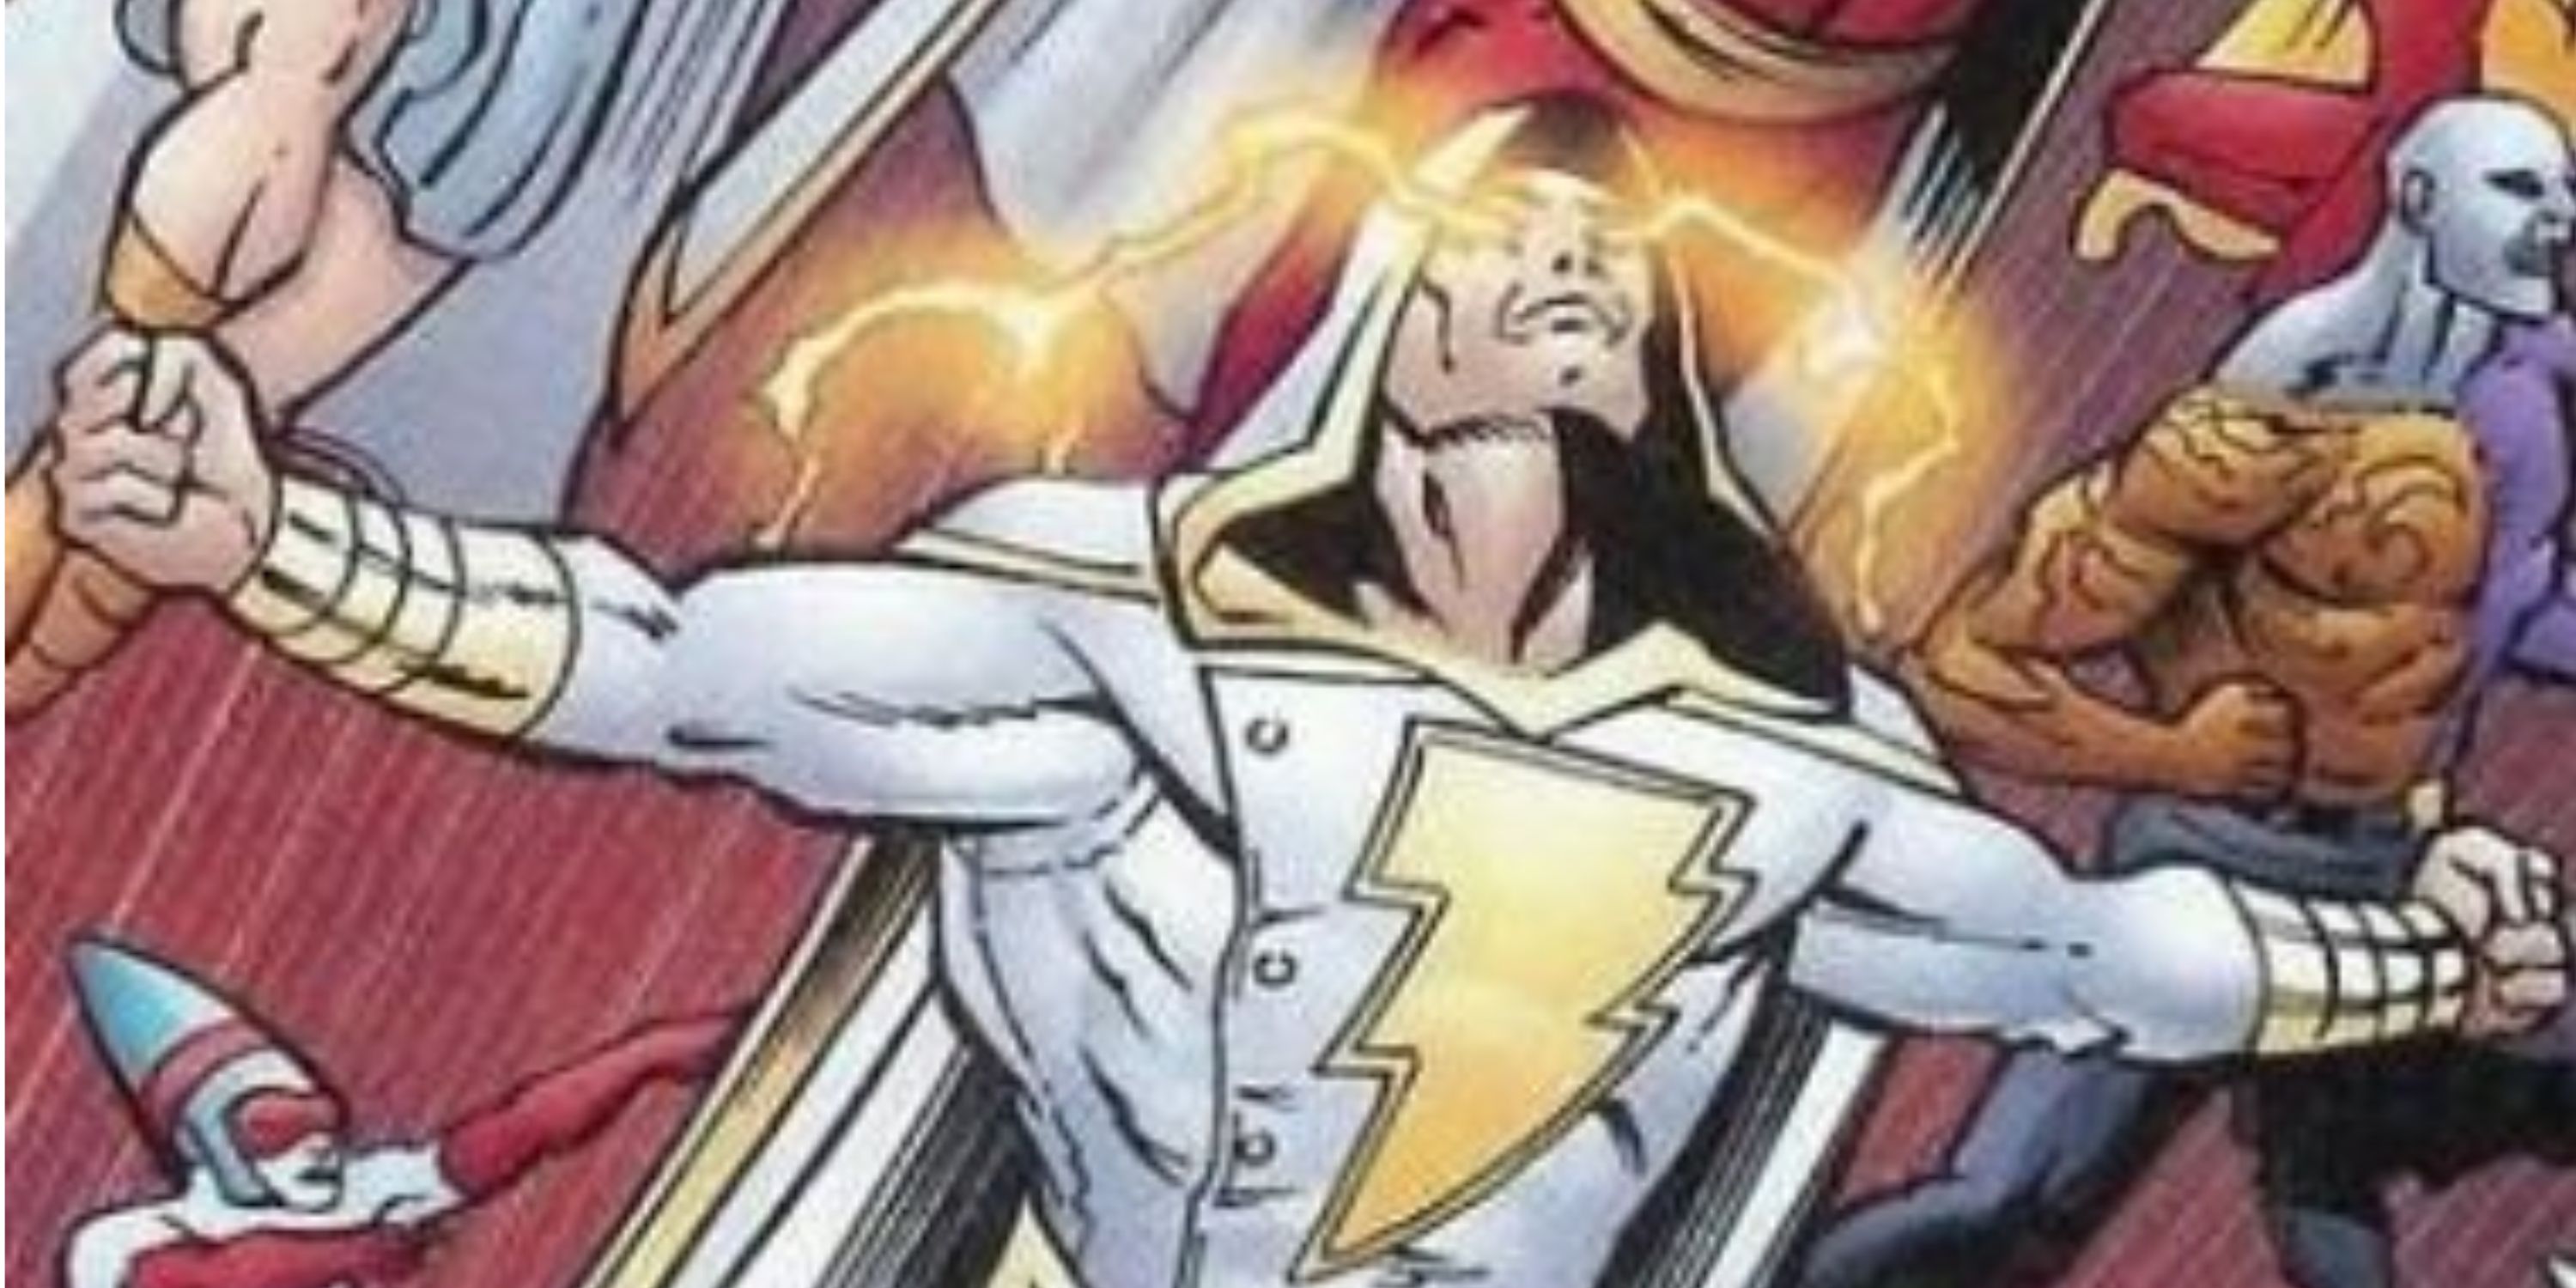 Billy Batson as the Wizard Shazam from Dc Comics